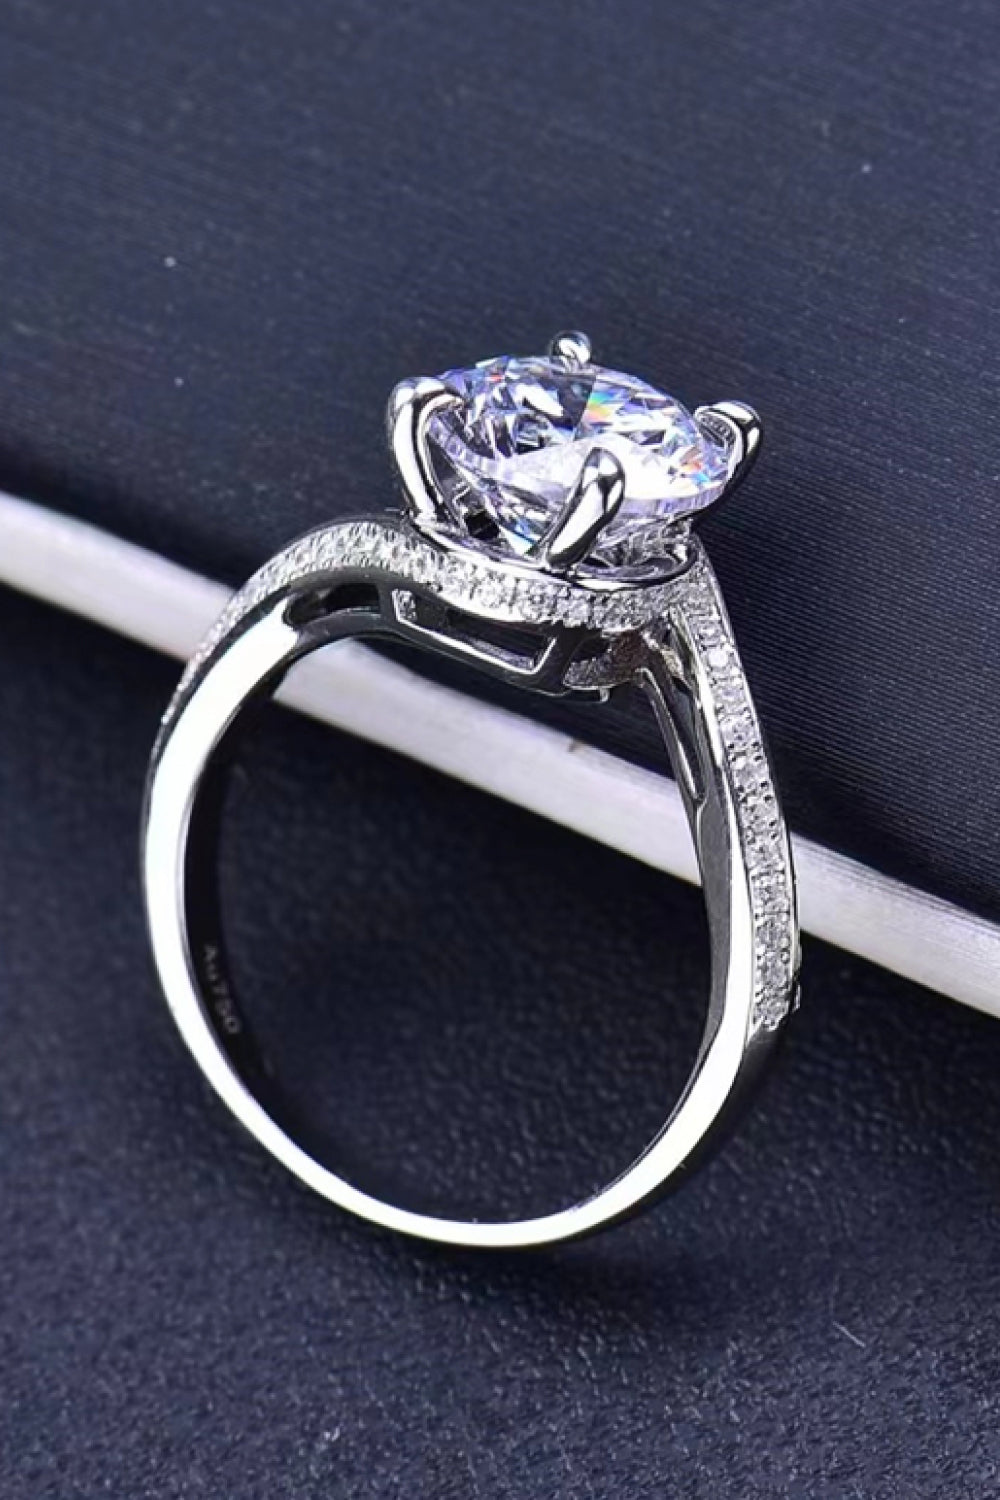 Keep Your Eyes On Me 3 Carat Moissanite Ring - Thandynie